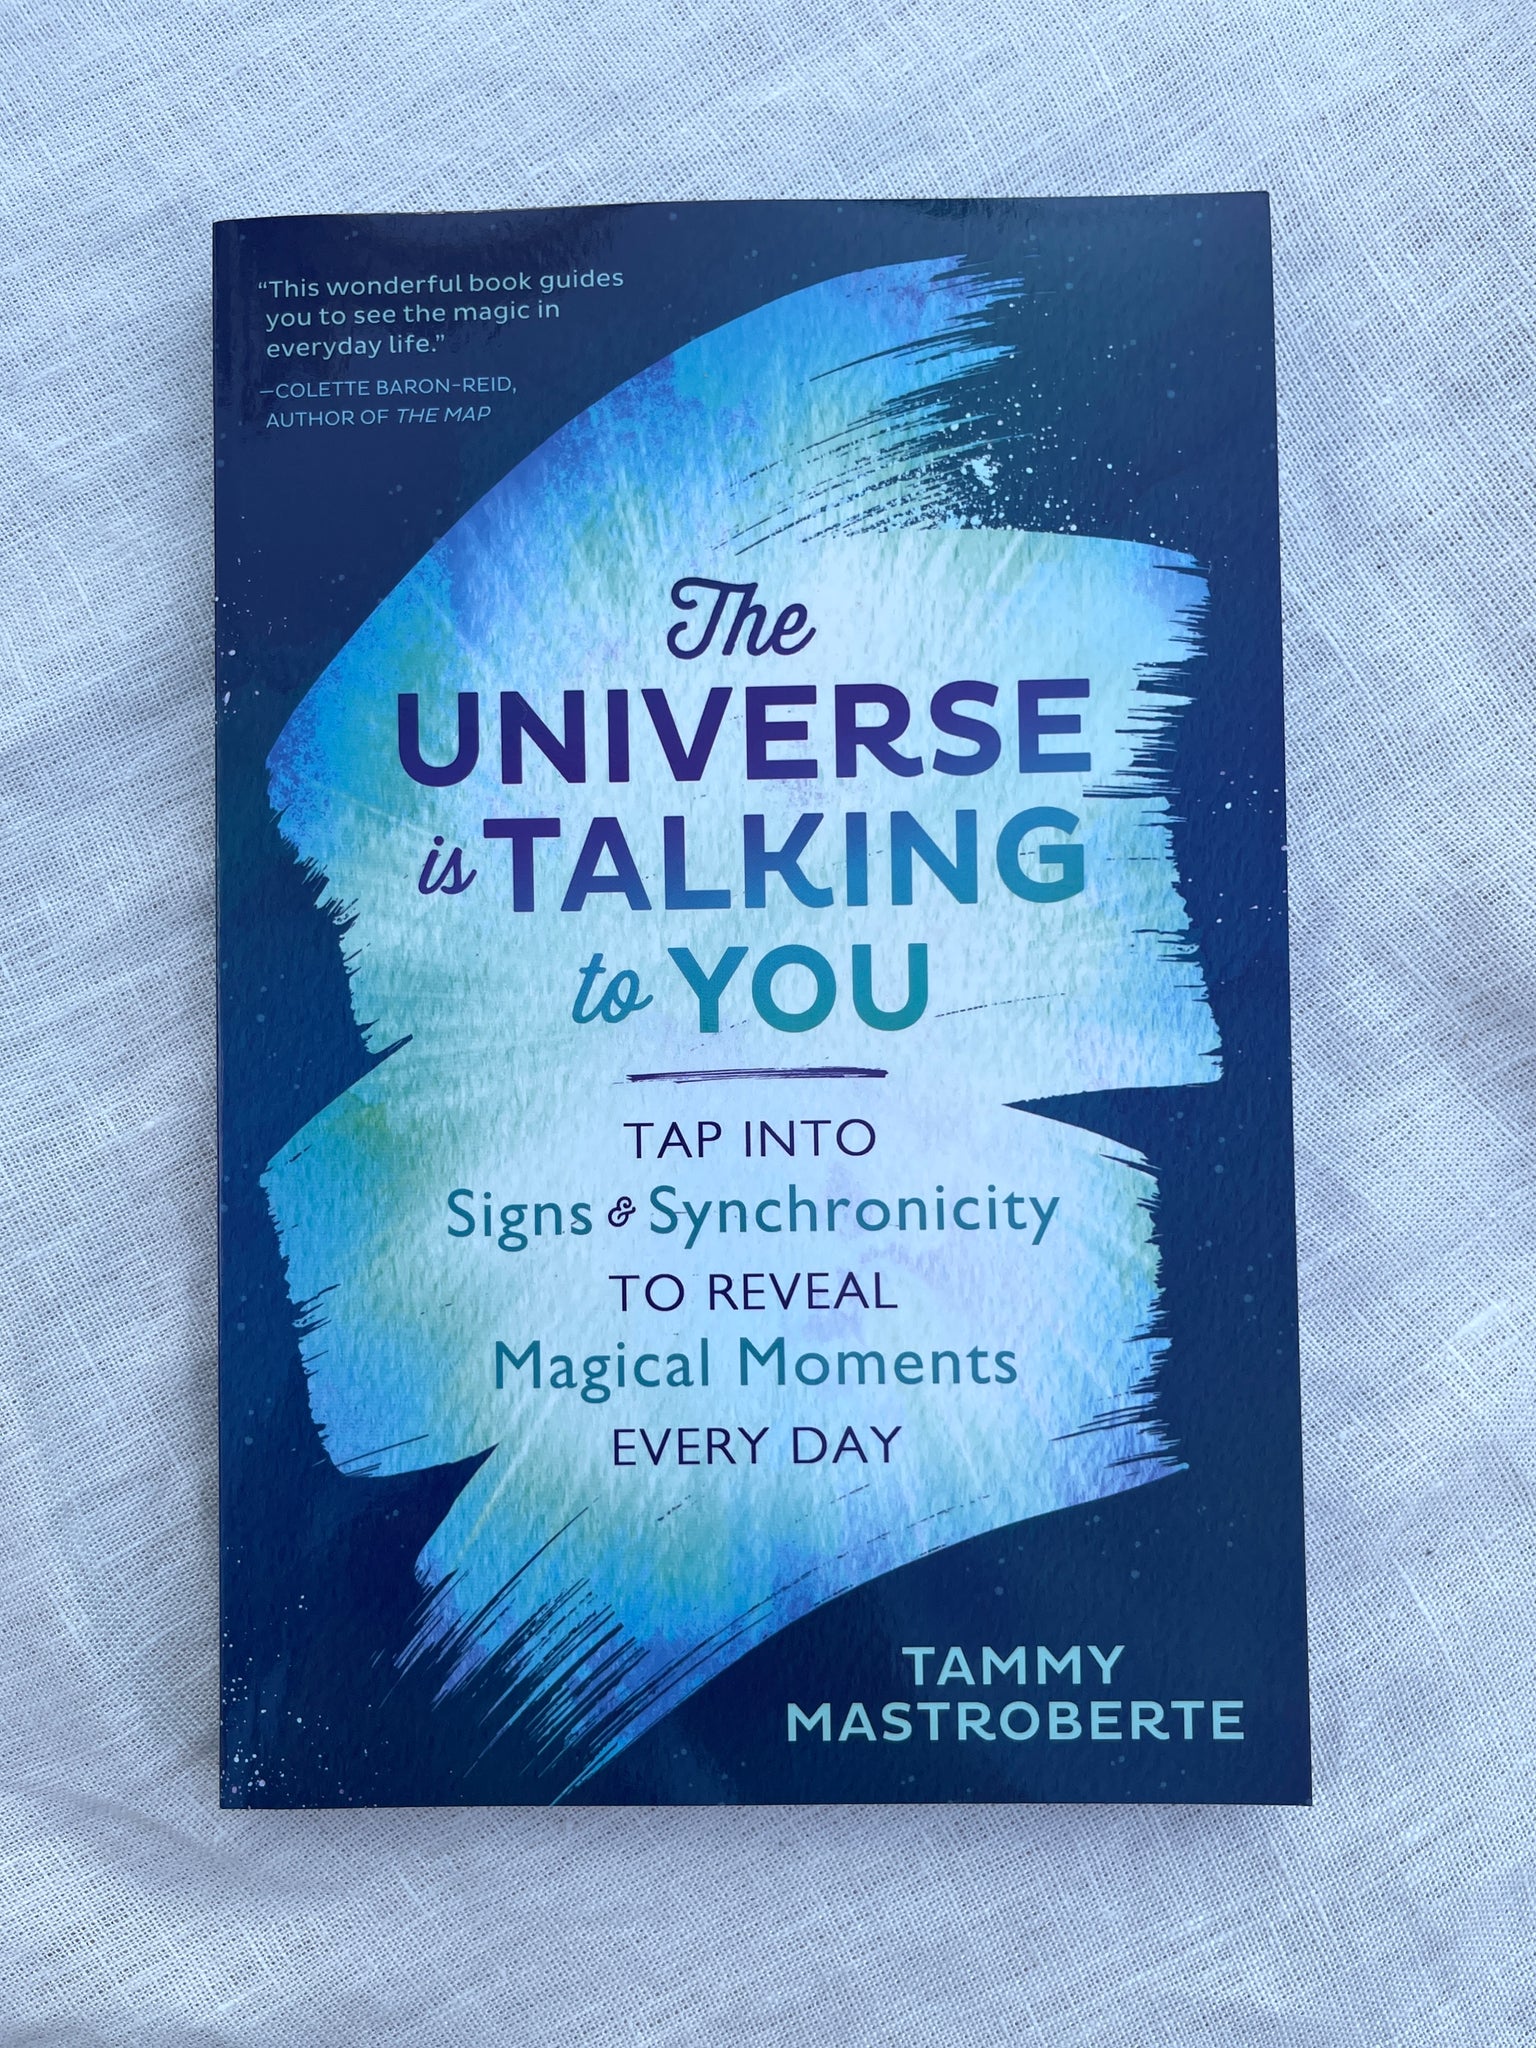 The Universe is Talking to You book tap into signs and syncronicity to reveal magical moments everyday